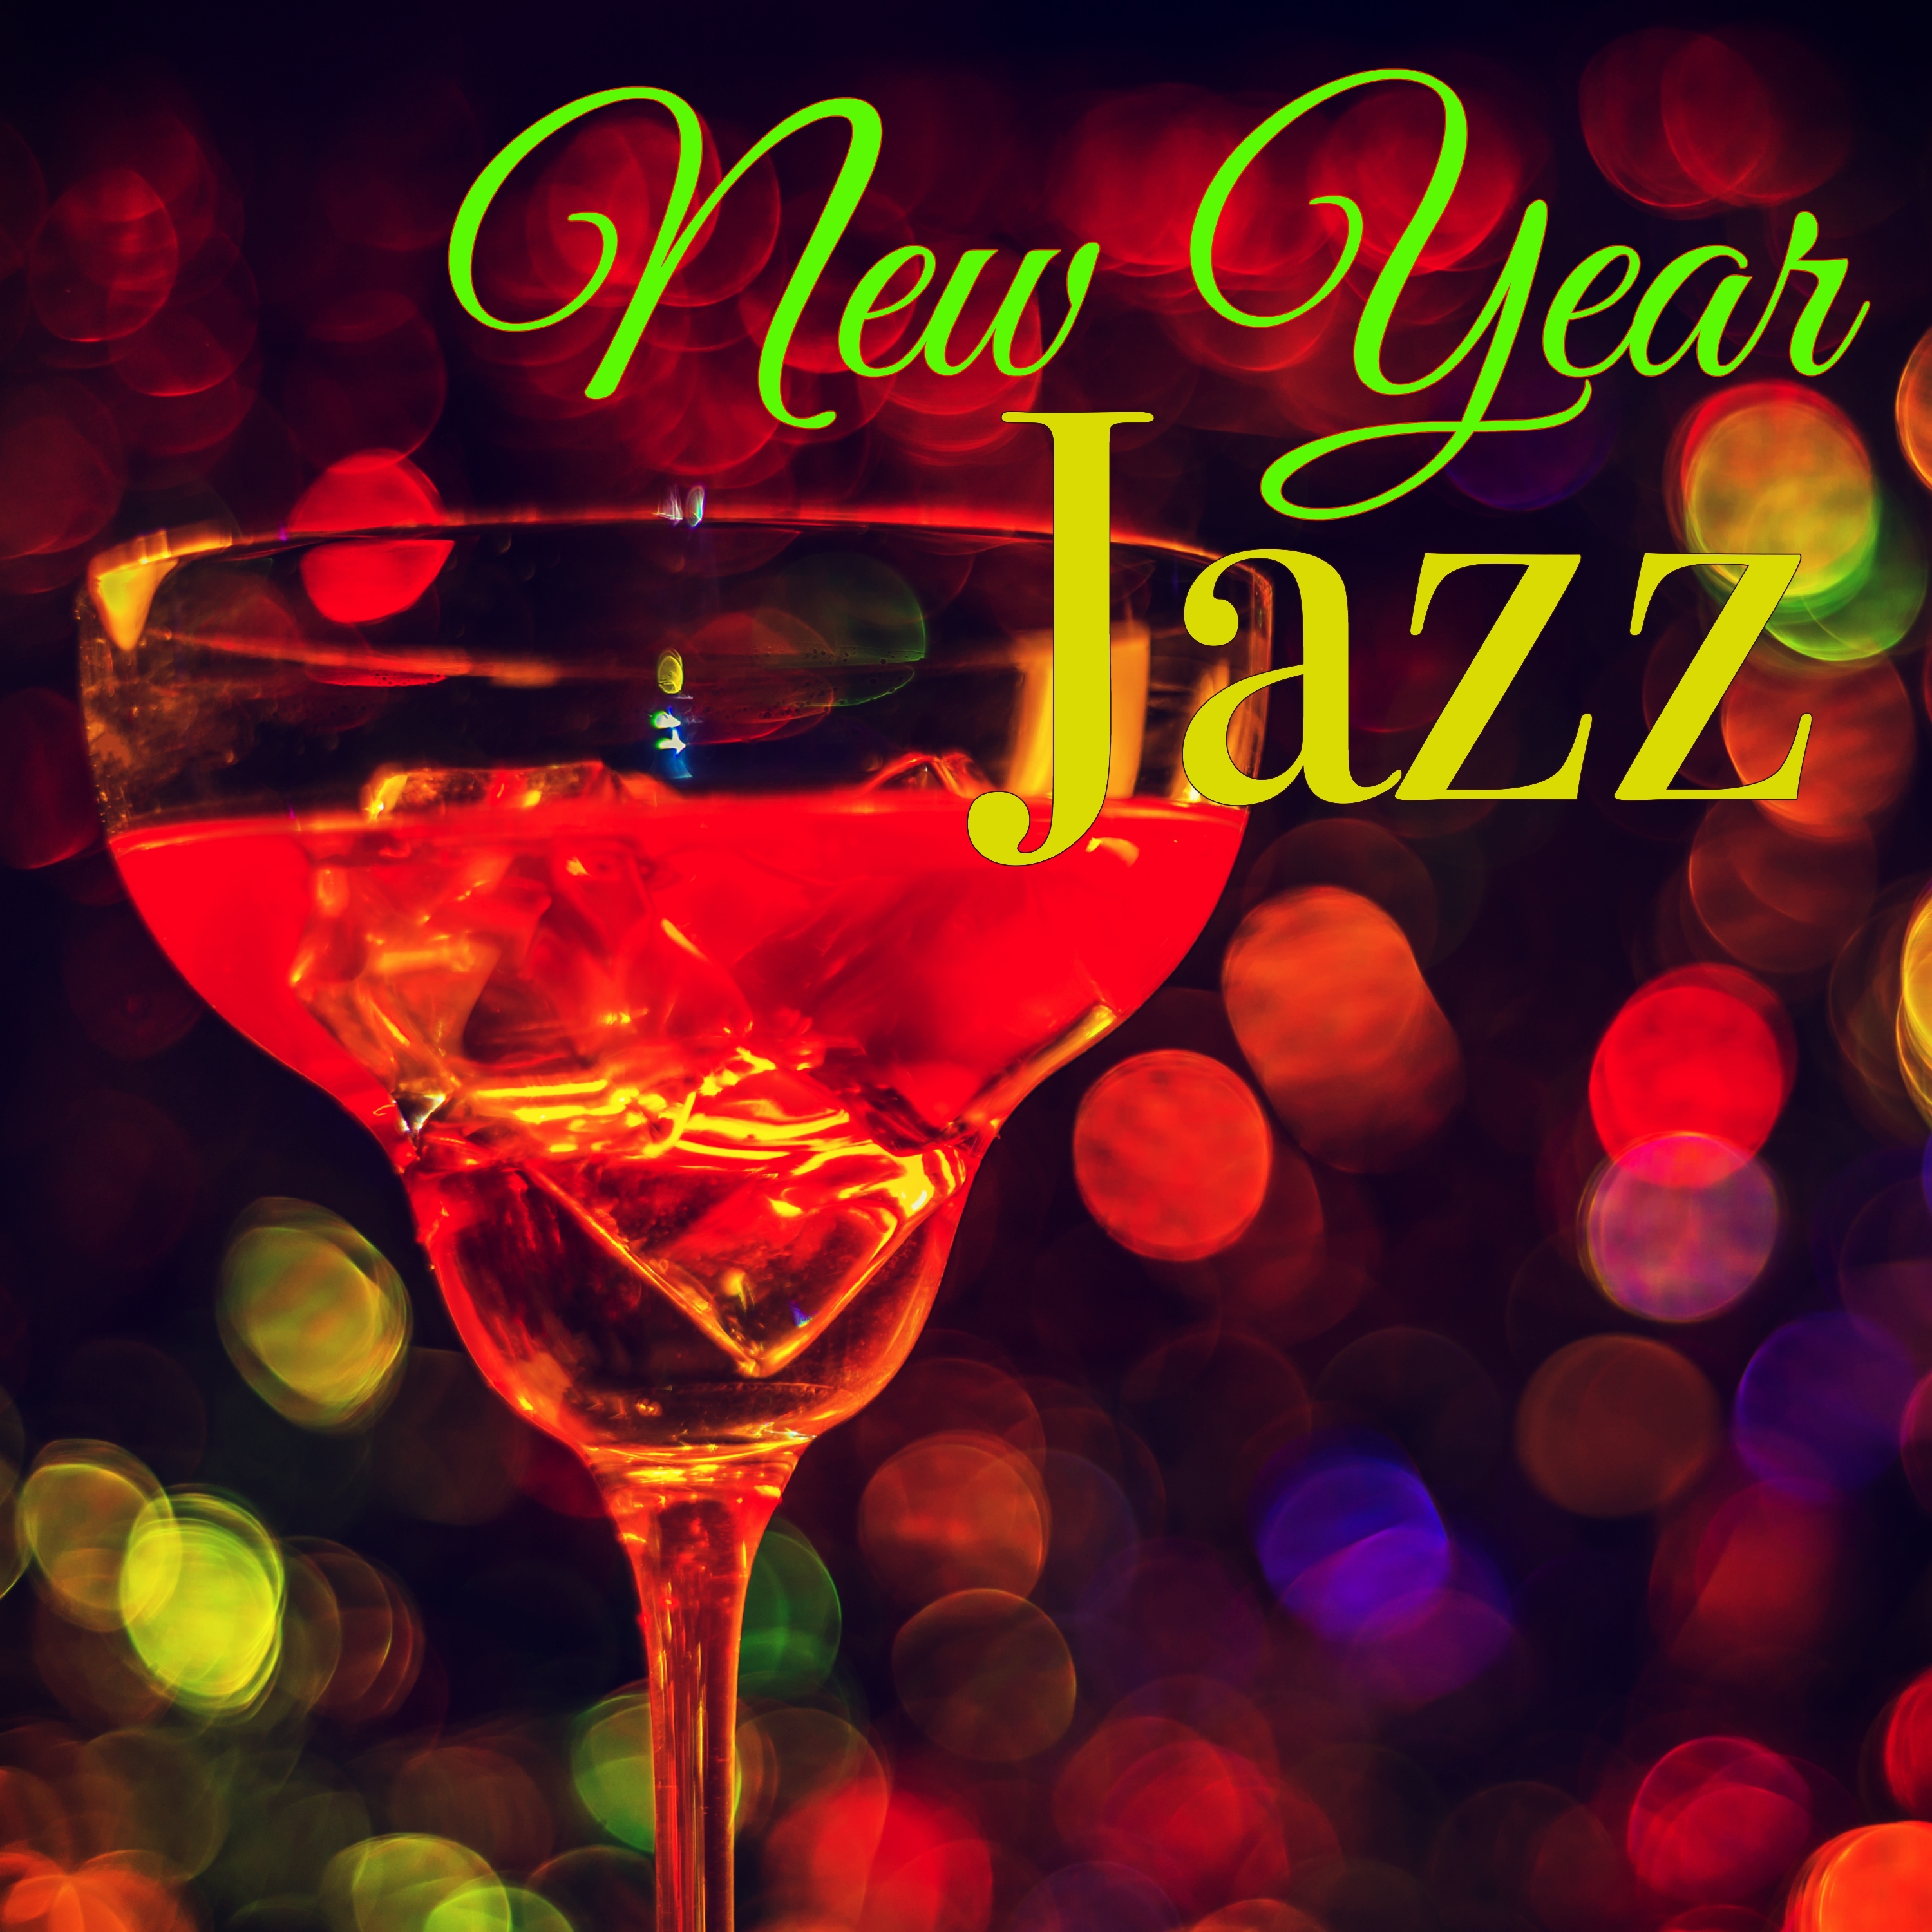 Chicago Jazz Club - New Year Eve Party